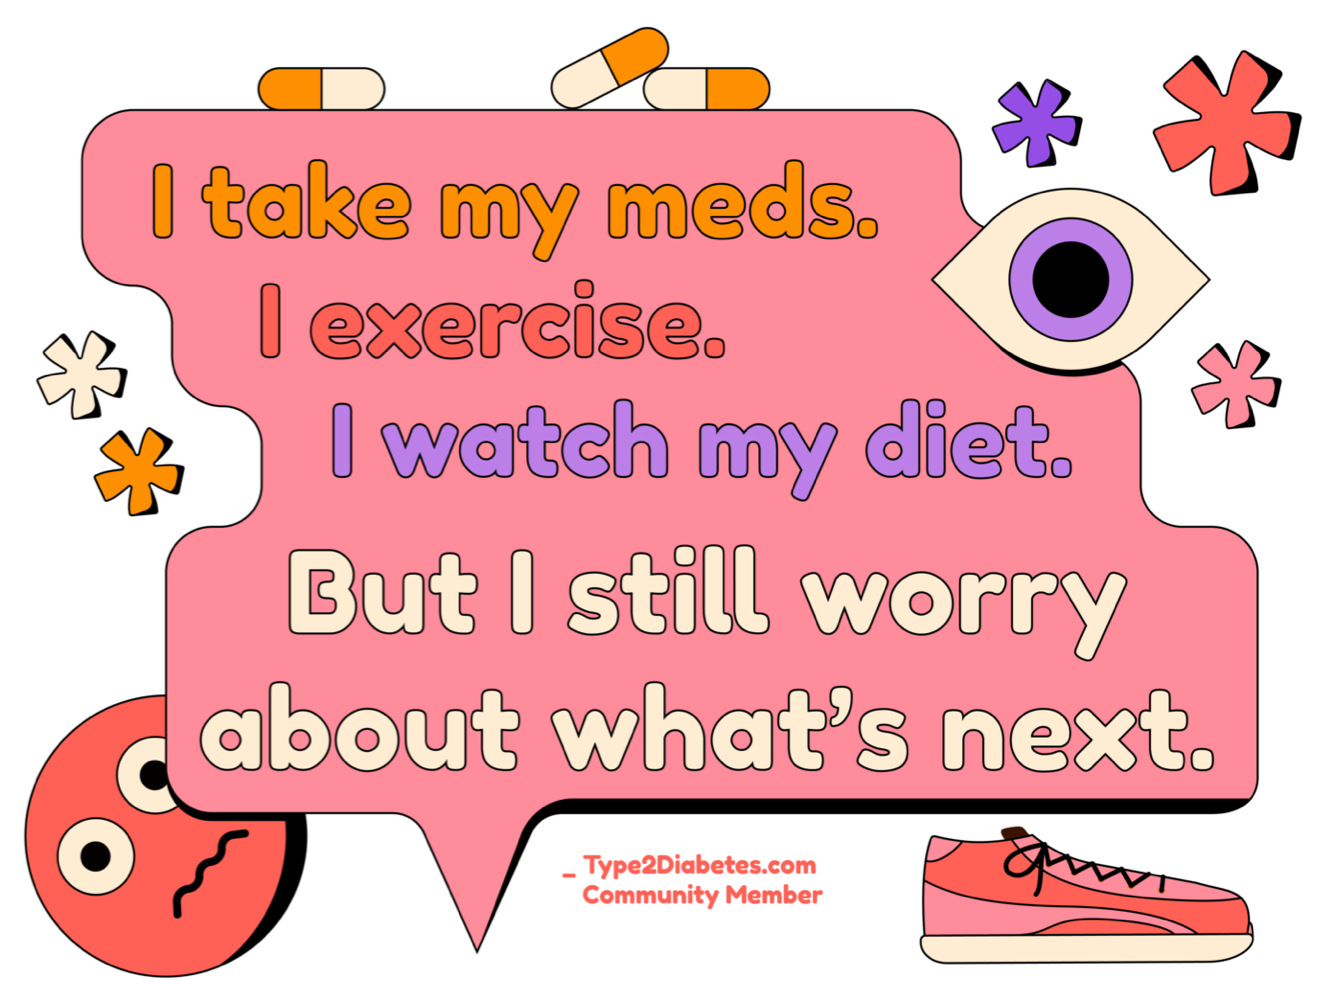 I take my meds. I exercise. I watch my diet. But I still worry about what’s next. - type2diabetes.com Community Member